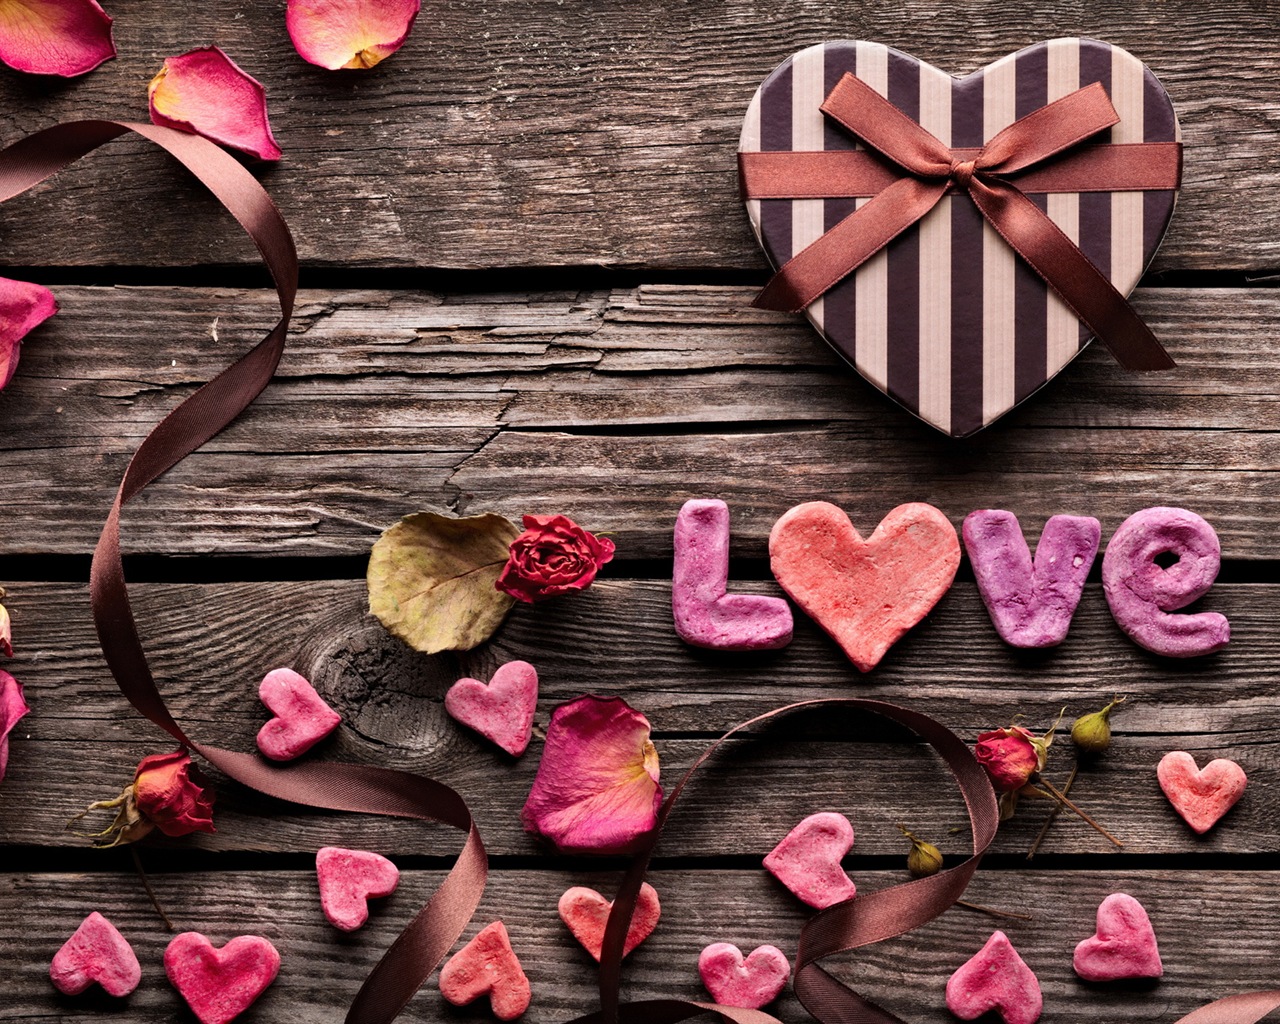 Warm and romantic Valentine's Day HD wallpapers #16 - 1280x1024